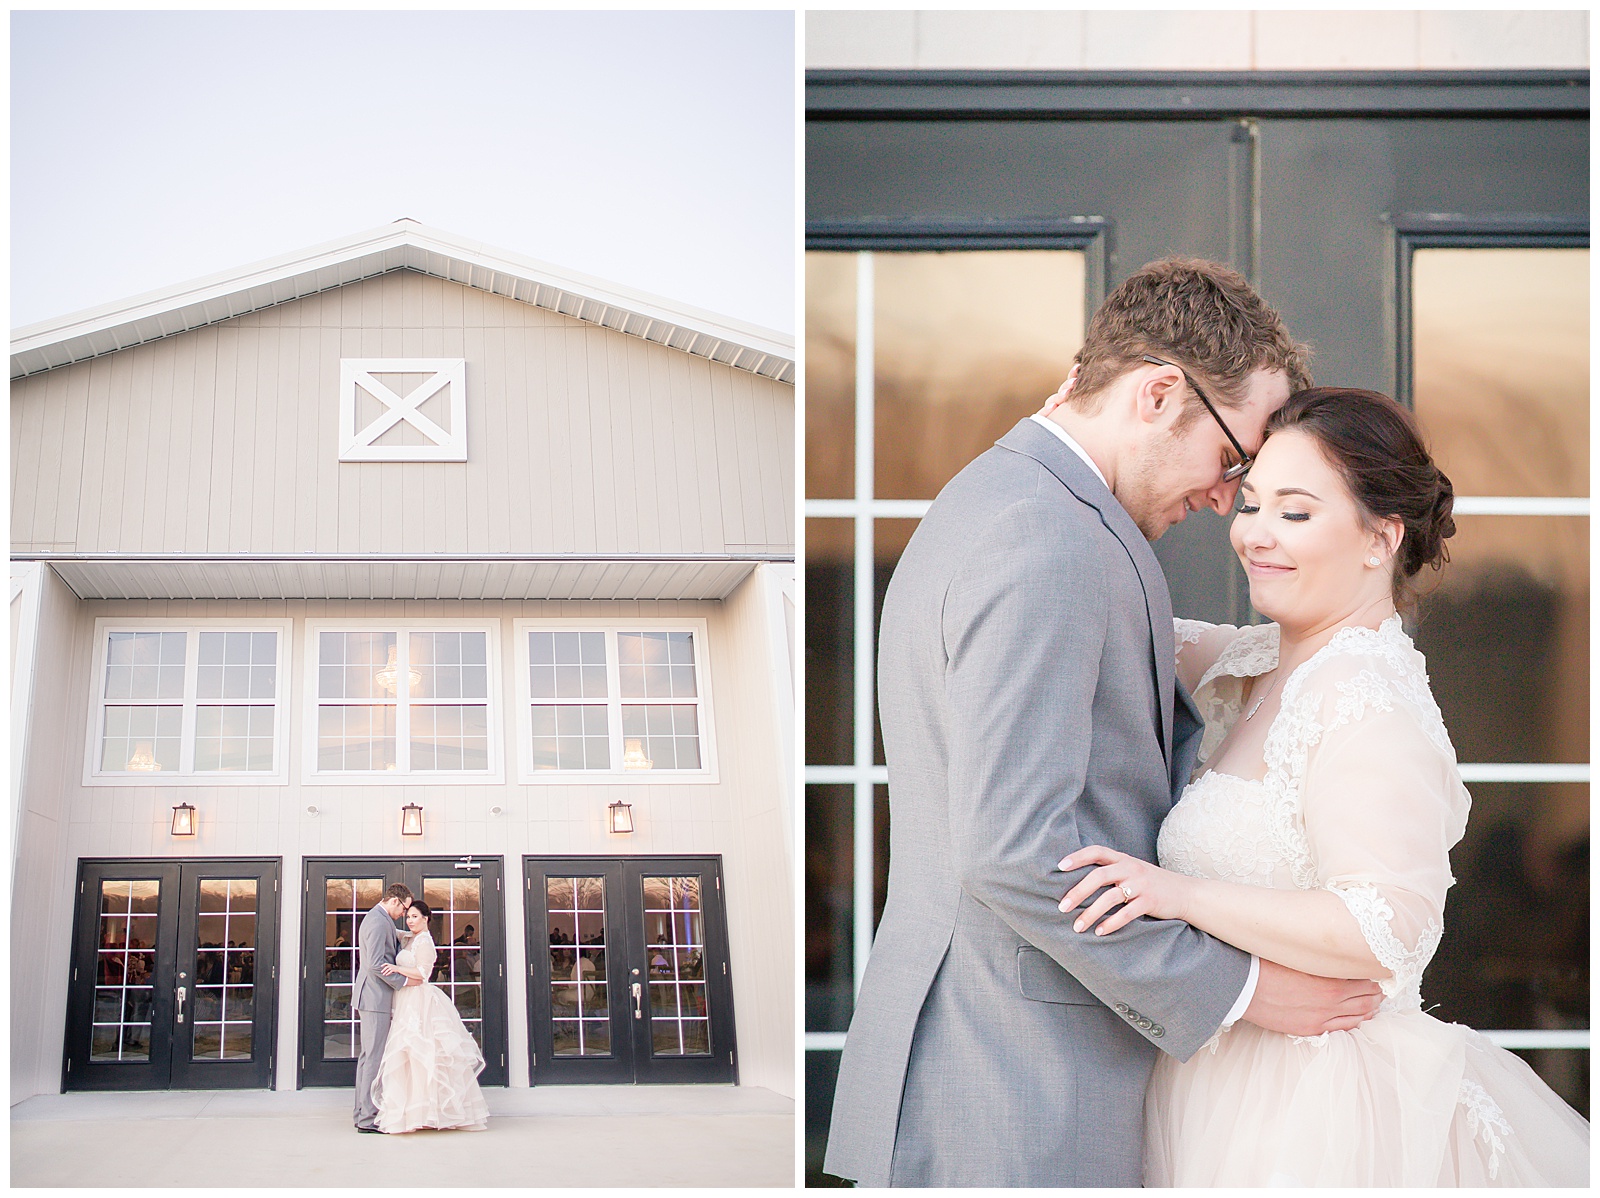 Wedding photography at The Farms at Woodend Springs in Bonner Springs, Kansas, by Kansas City wedding photographers Wisdom-Watson Weddings.